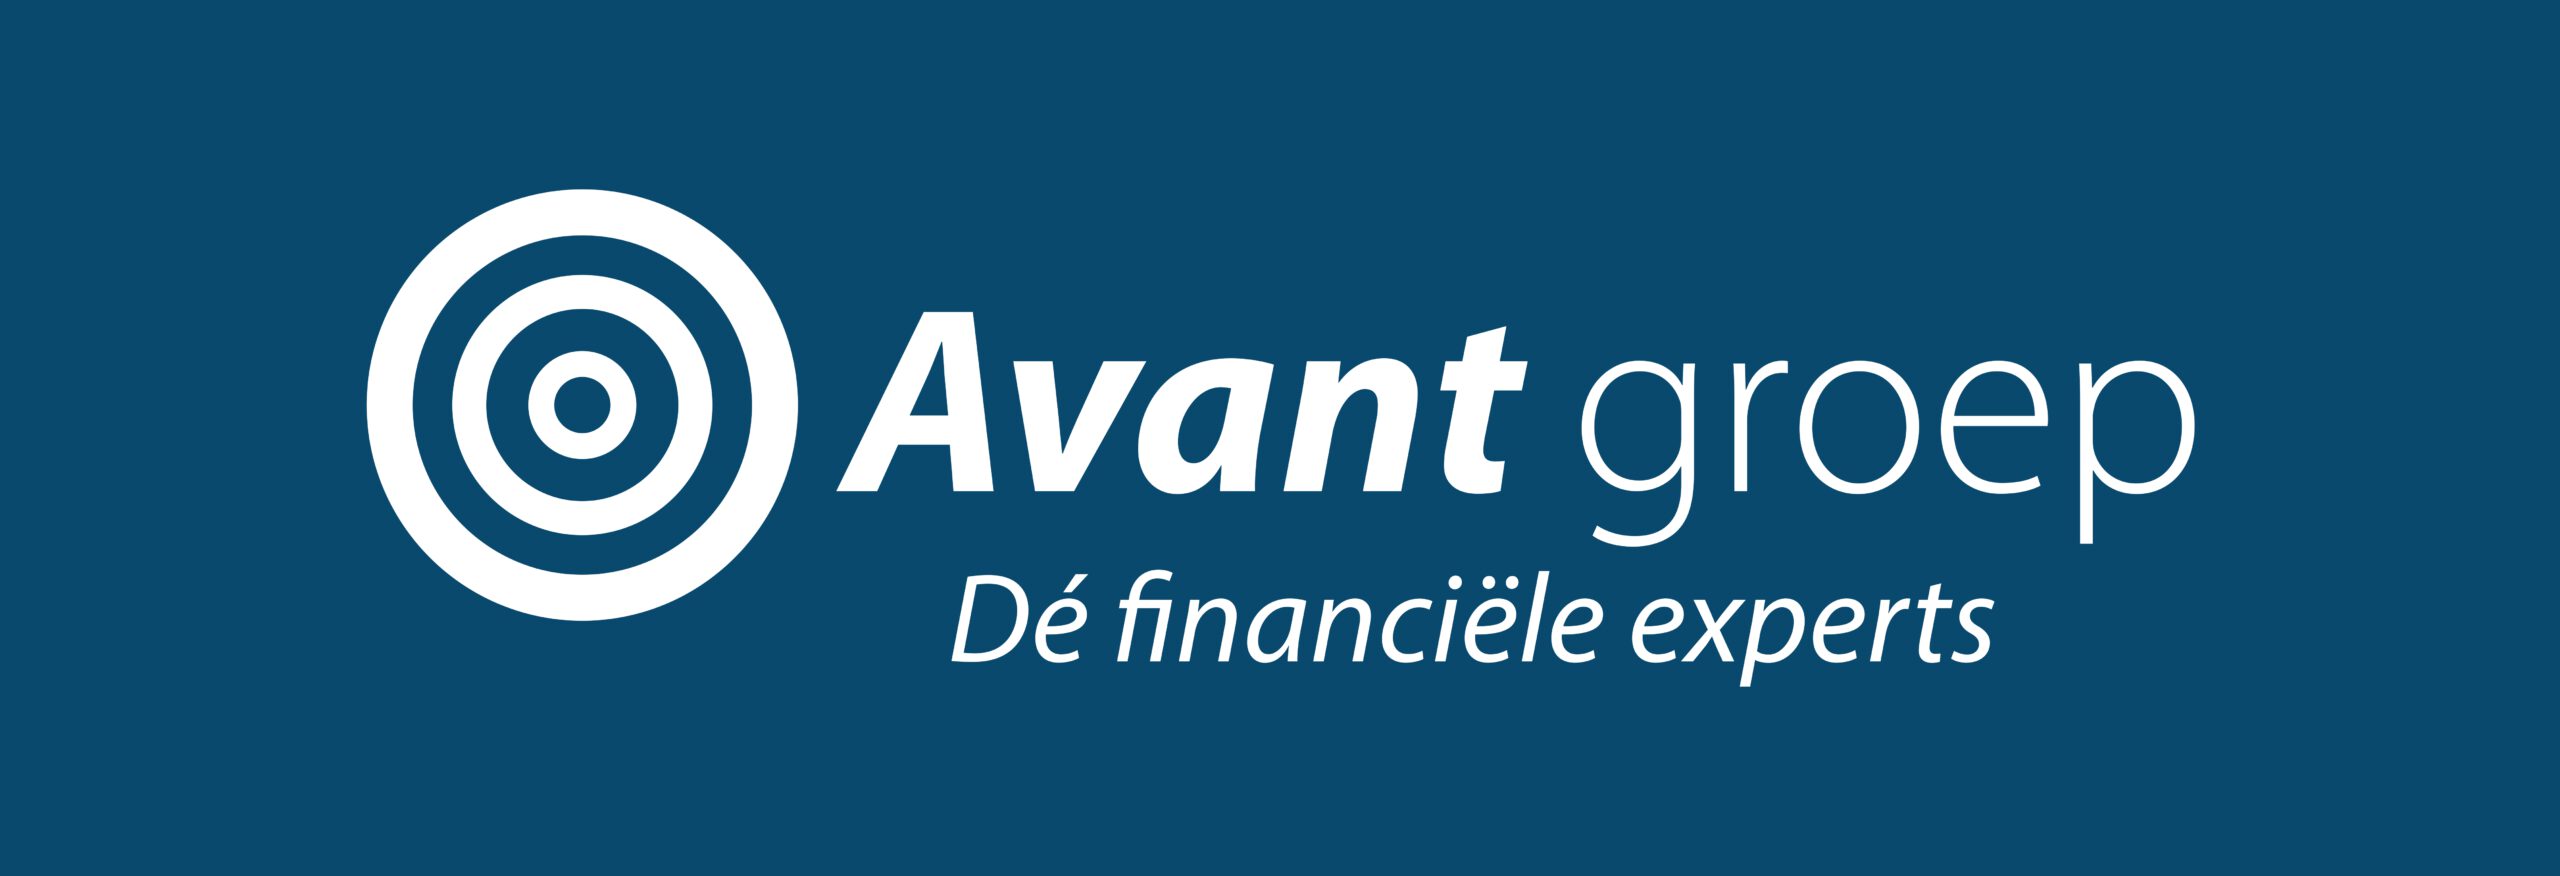 Avant 150x50_pages-to-jpg-0001